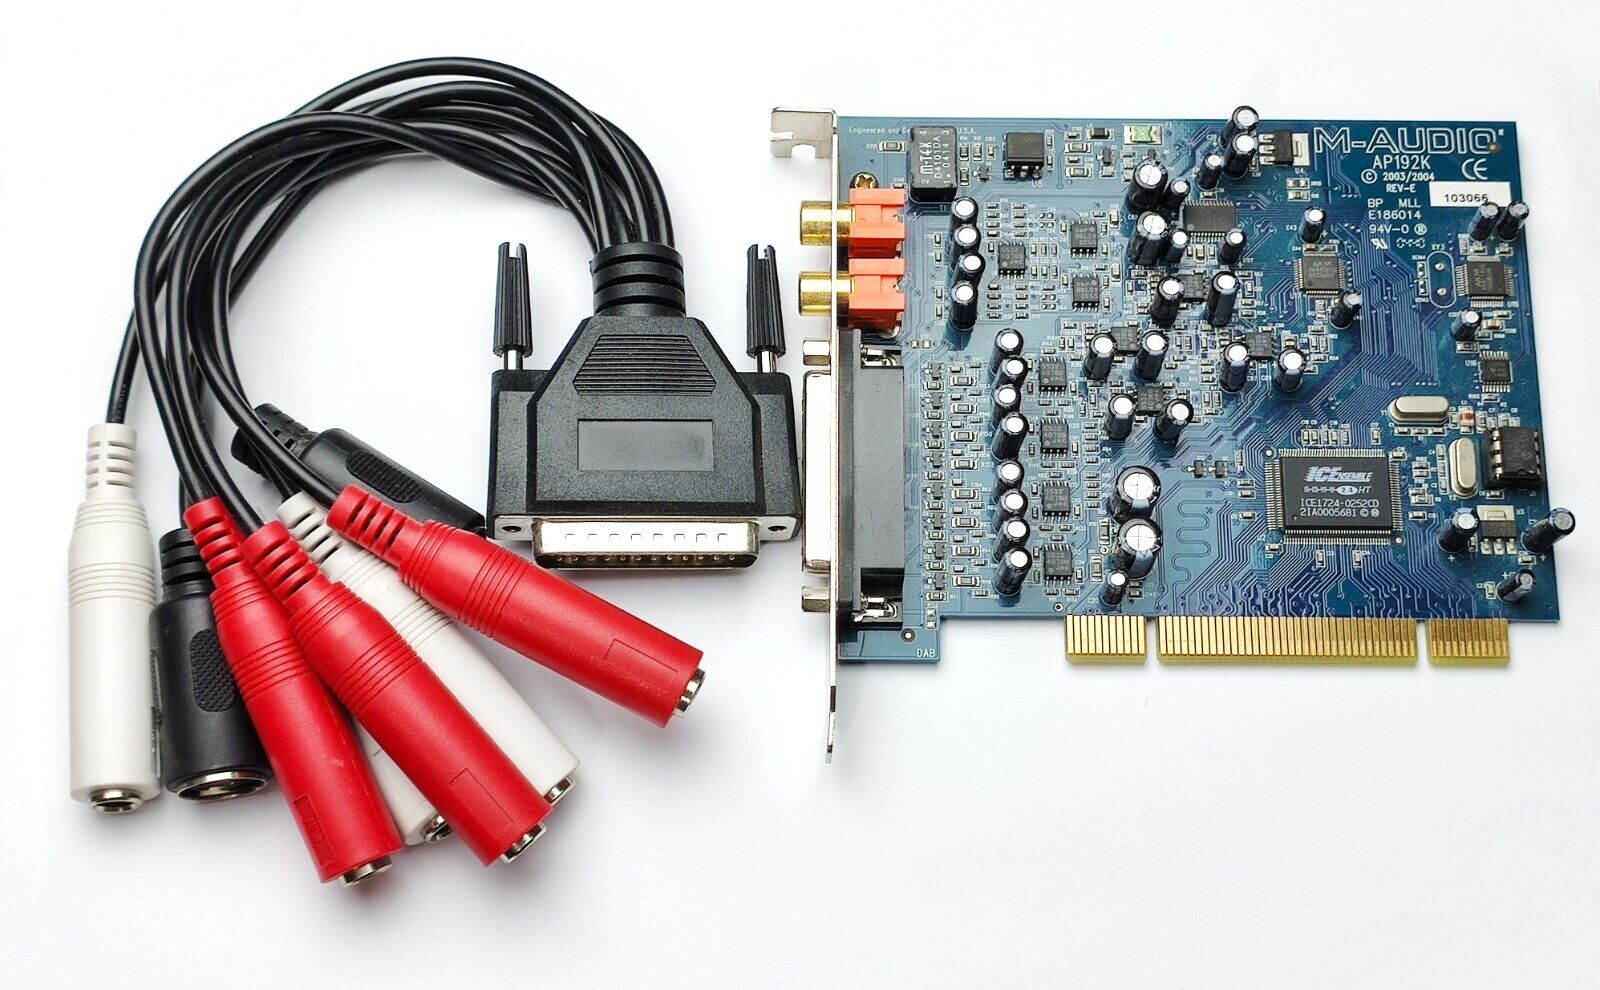 M-Audio Audiophile AP192K - PCI sound card. Retro gaming and sound, music making